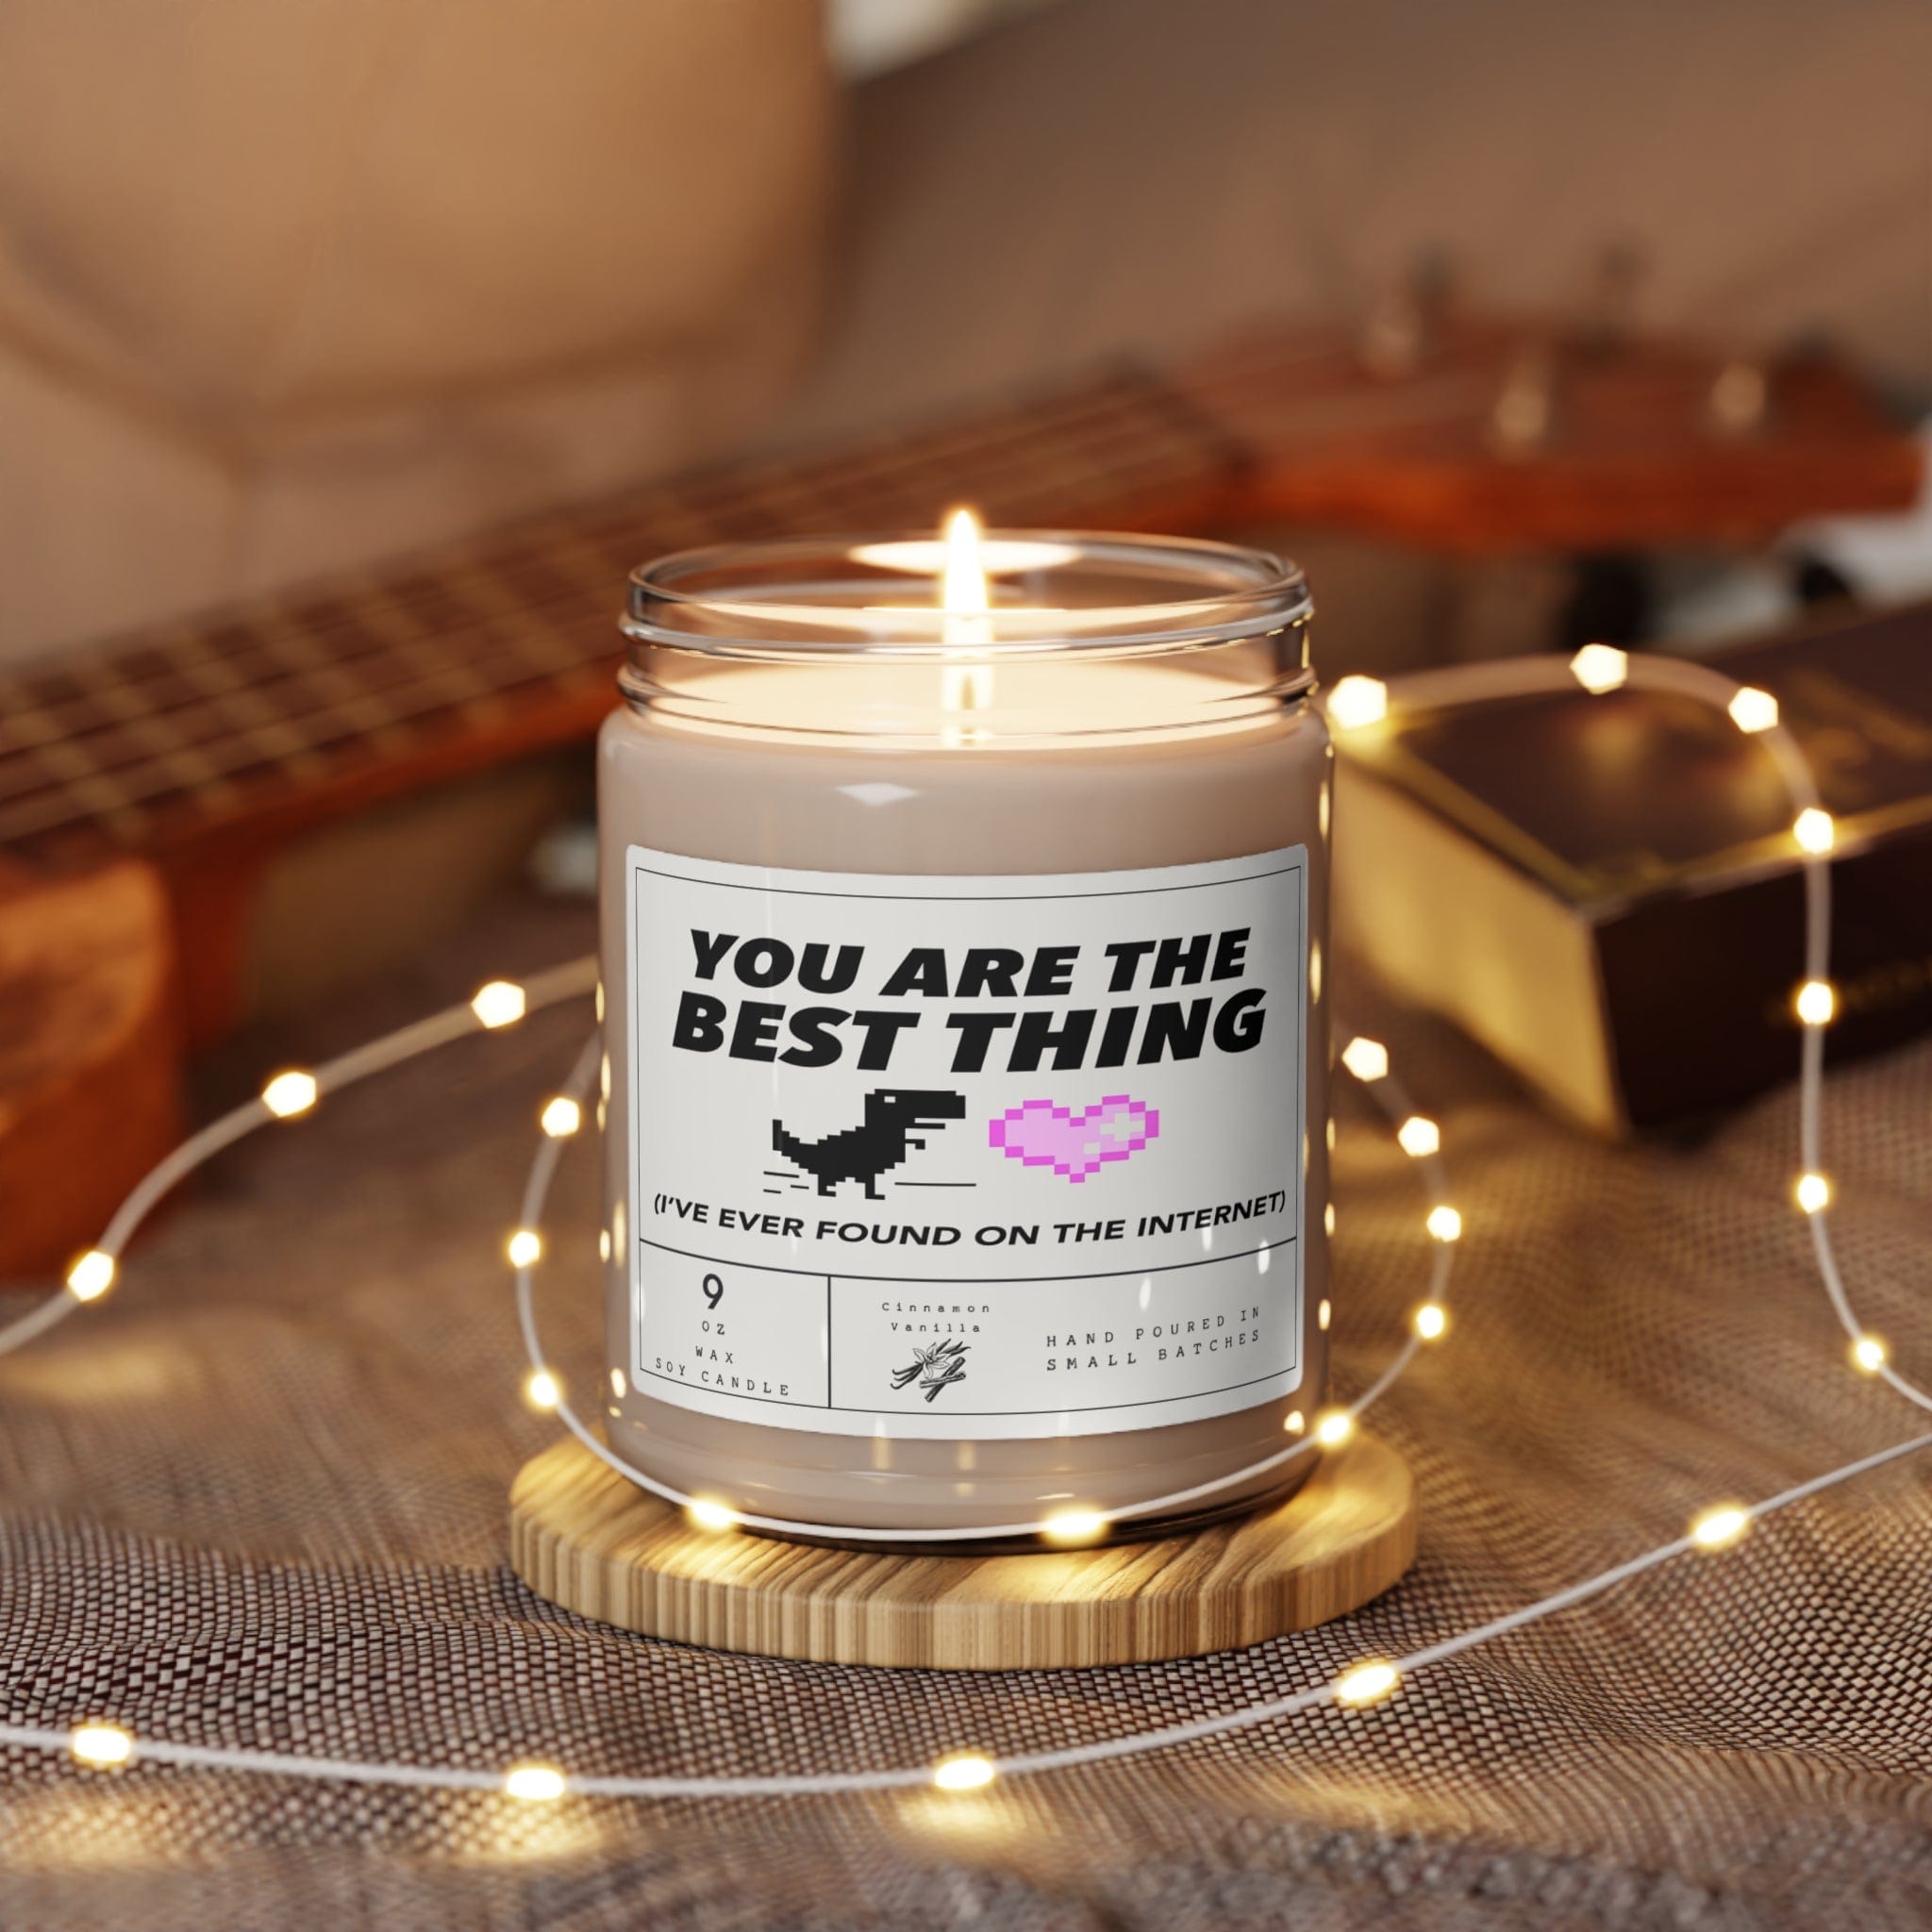 You Are The Best Thing I've Ever found on the internet - Anniversary Gift Scented Soy Candle, 9oz